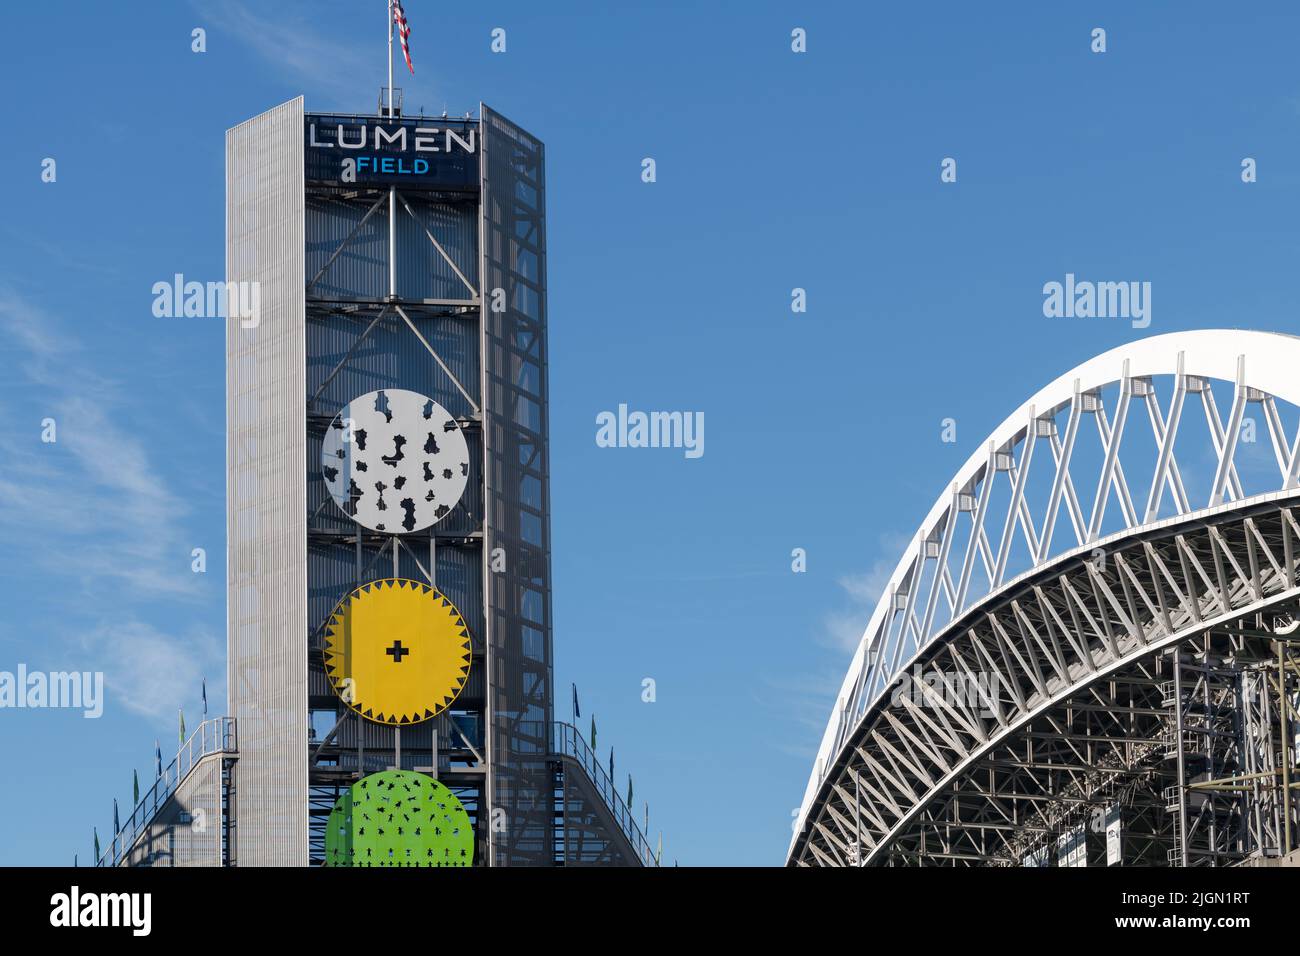 Seattle - July 09, 2022; North Tower and roof arch of Lumen Field stadium in Seattle Stock Photo